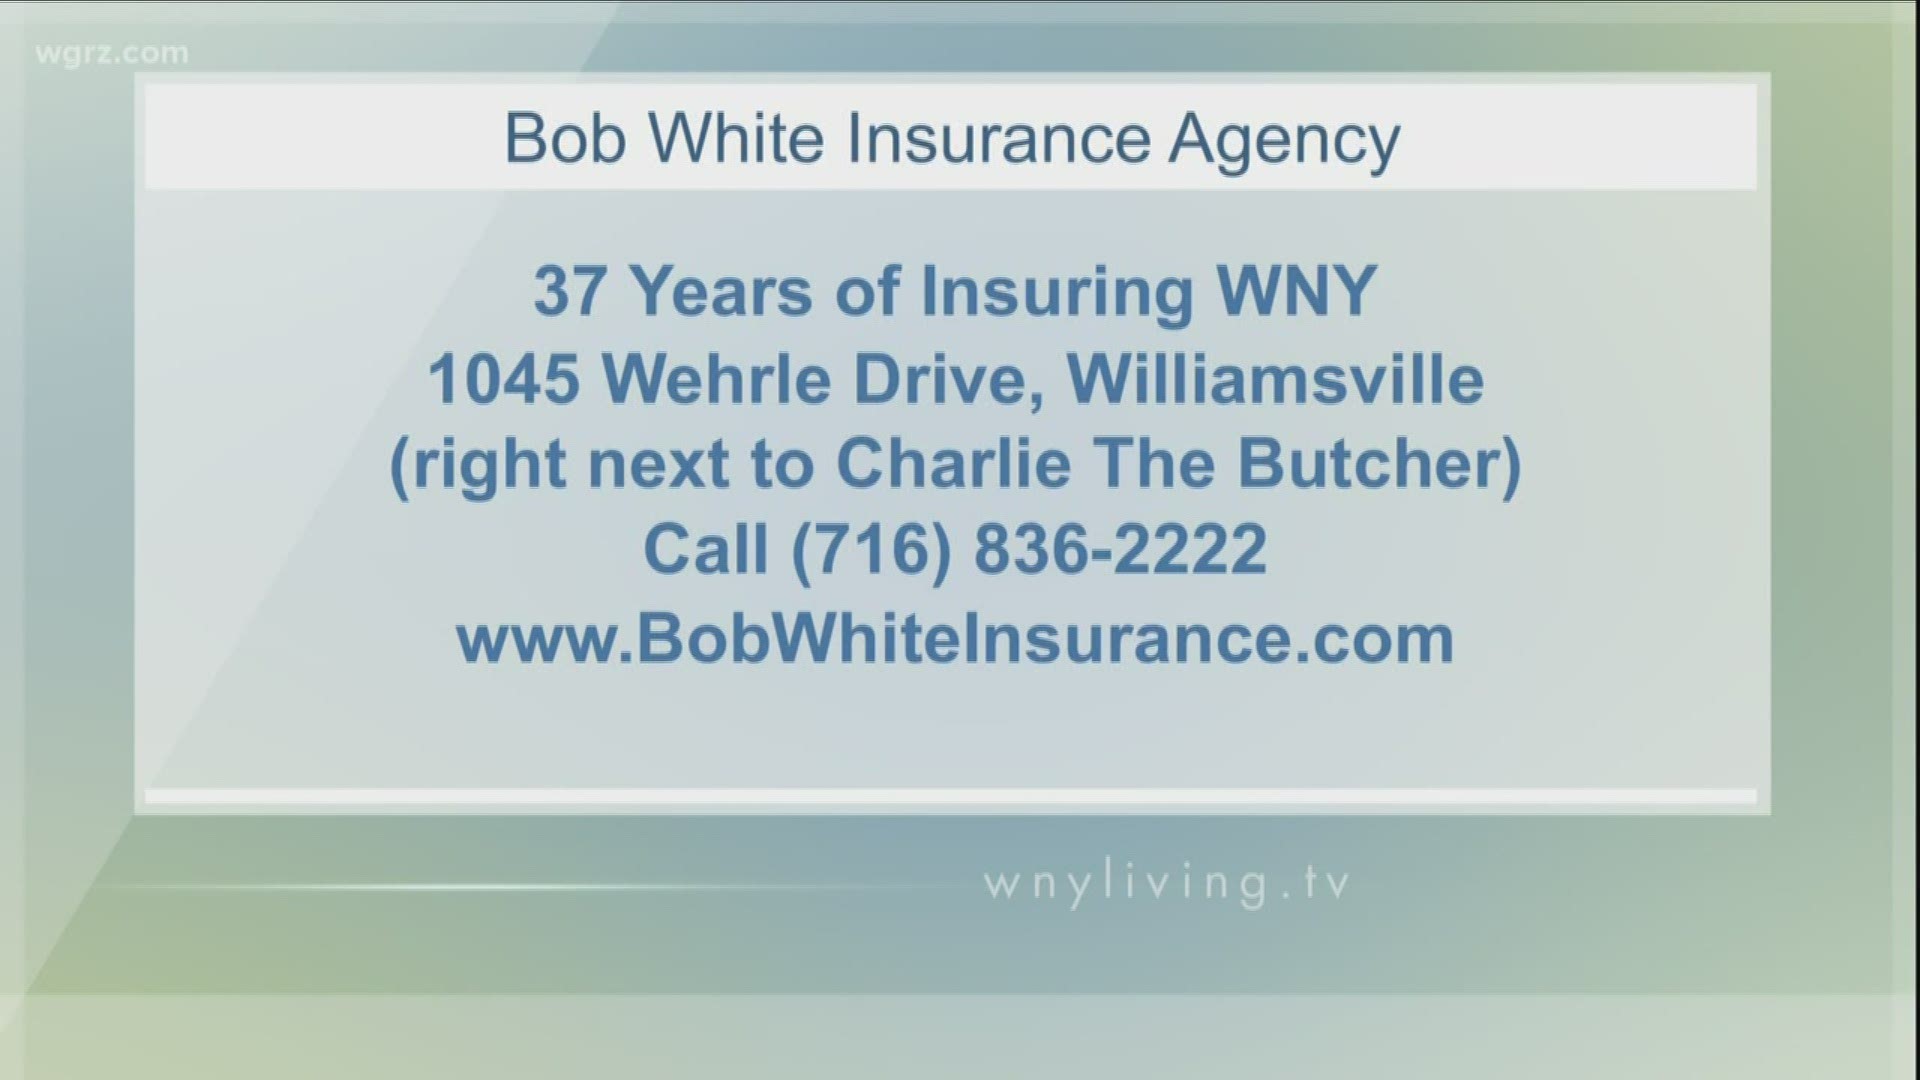 January 18 - WECK Bob White Insurance Agency (THIS VIDEO IS SPONSORED BY WECK BOB WHITE INSURANCE AGENCY)